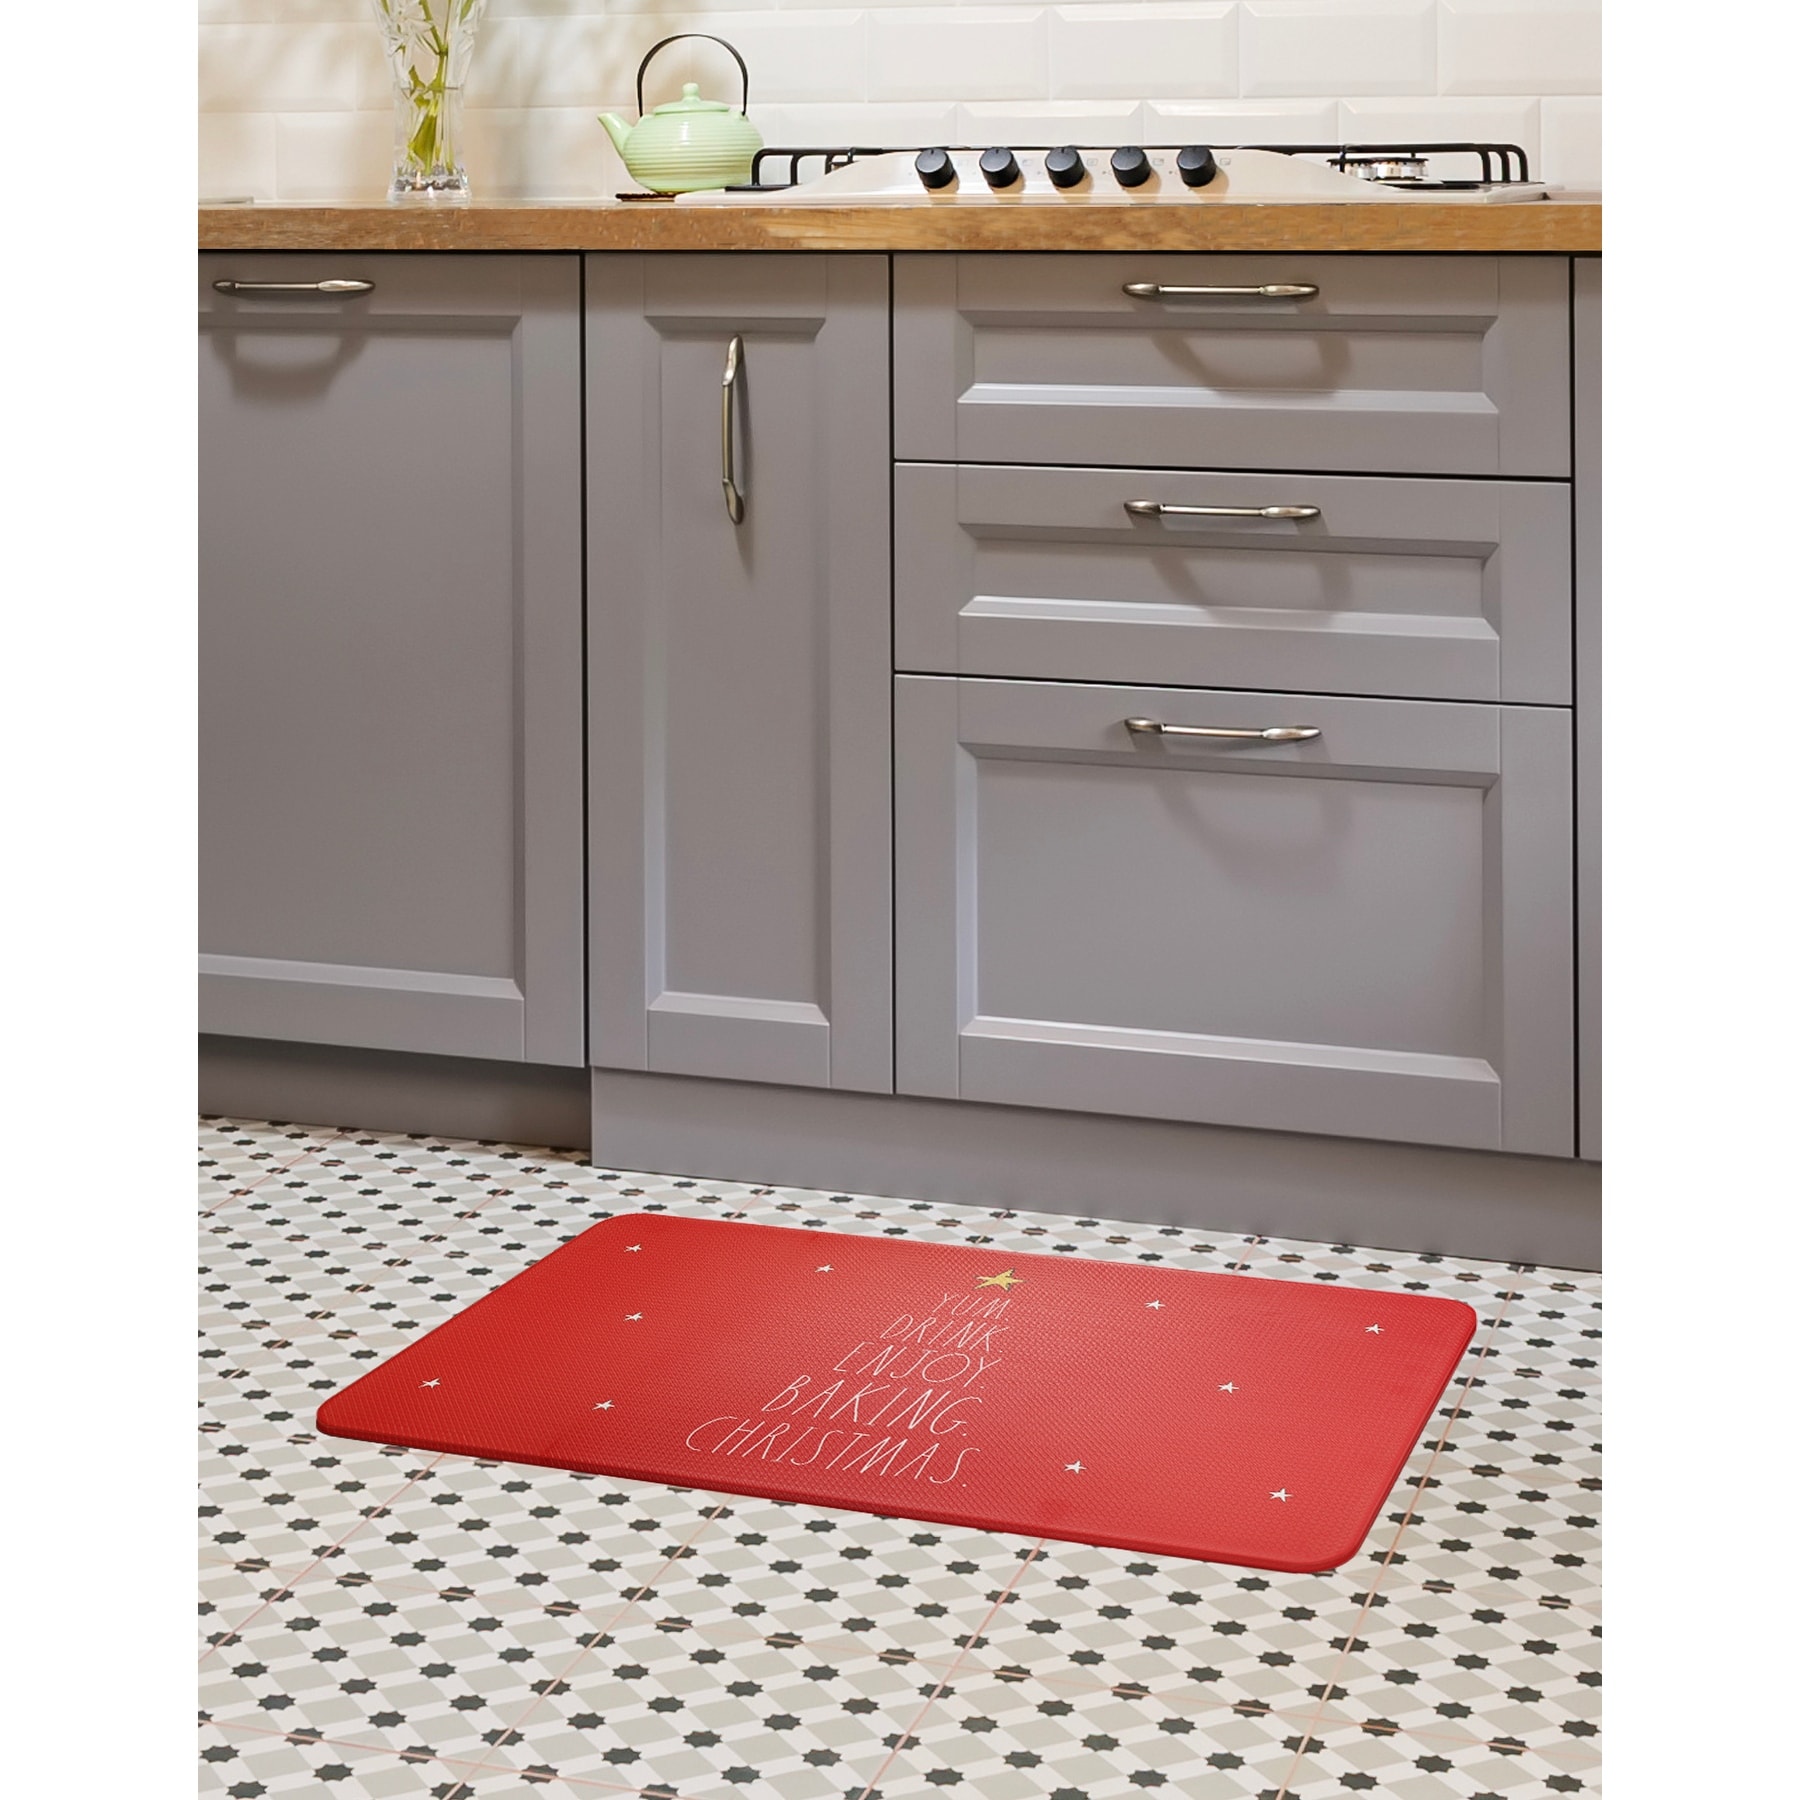 Best kitchen mat to help with back problems: Reader Q&A